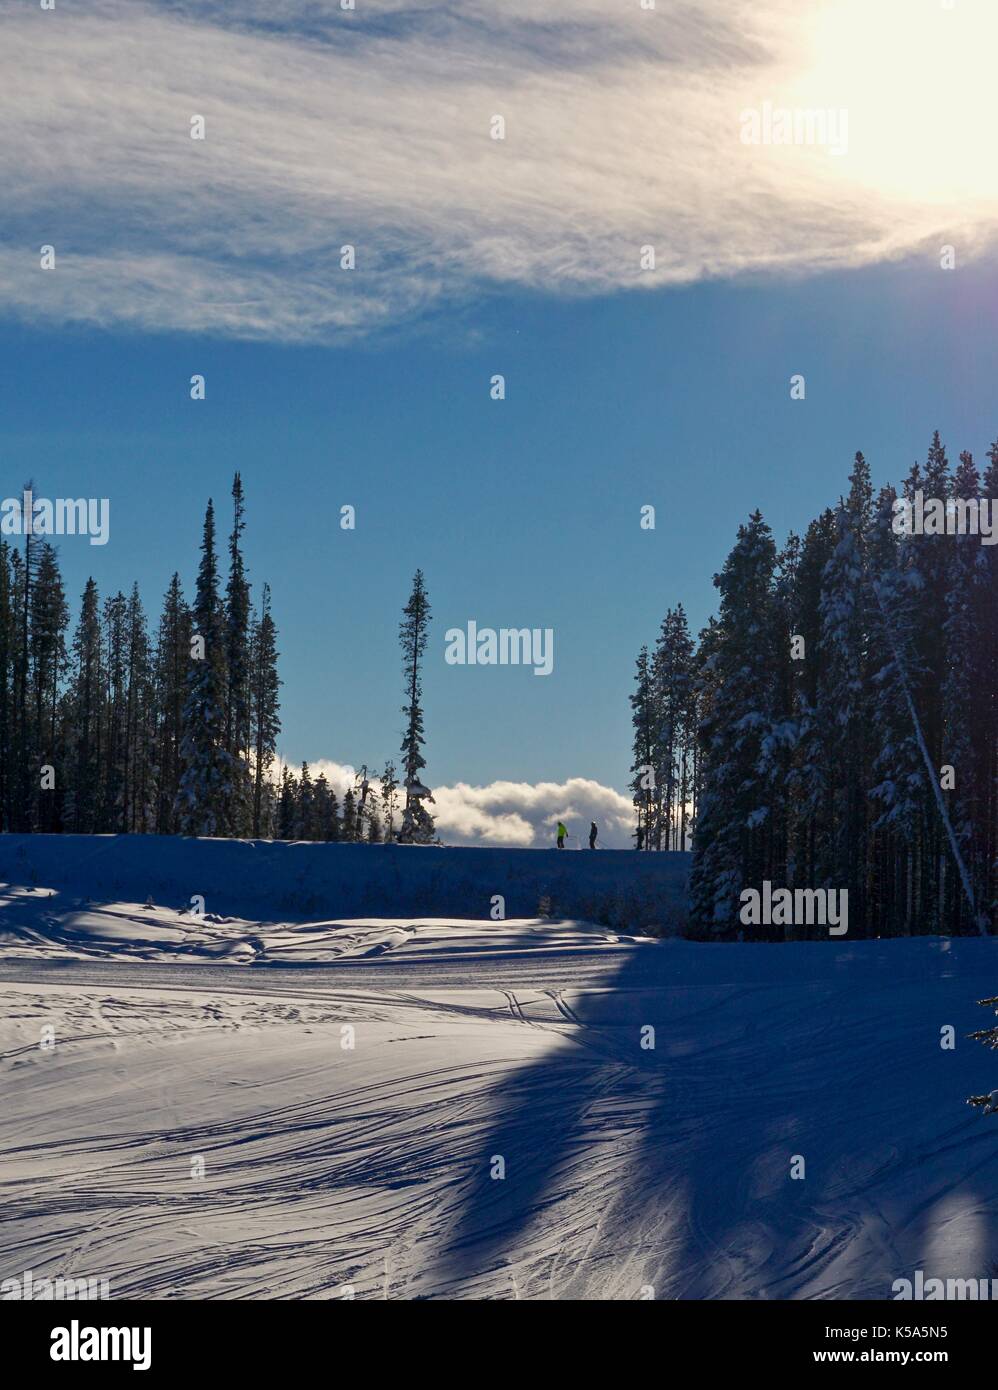 Two skiers in distance crossing ridge at ski hill in winter Stock Photo